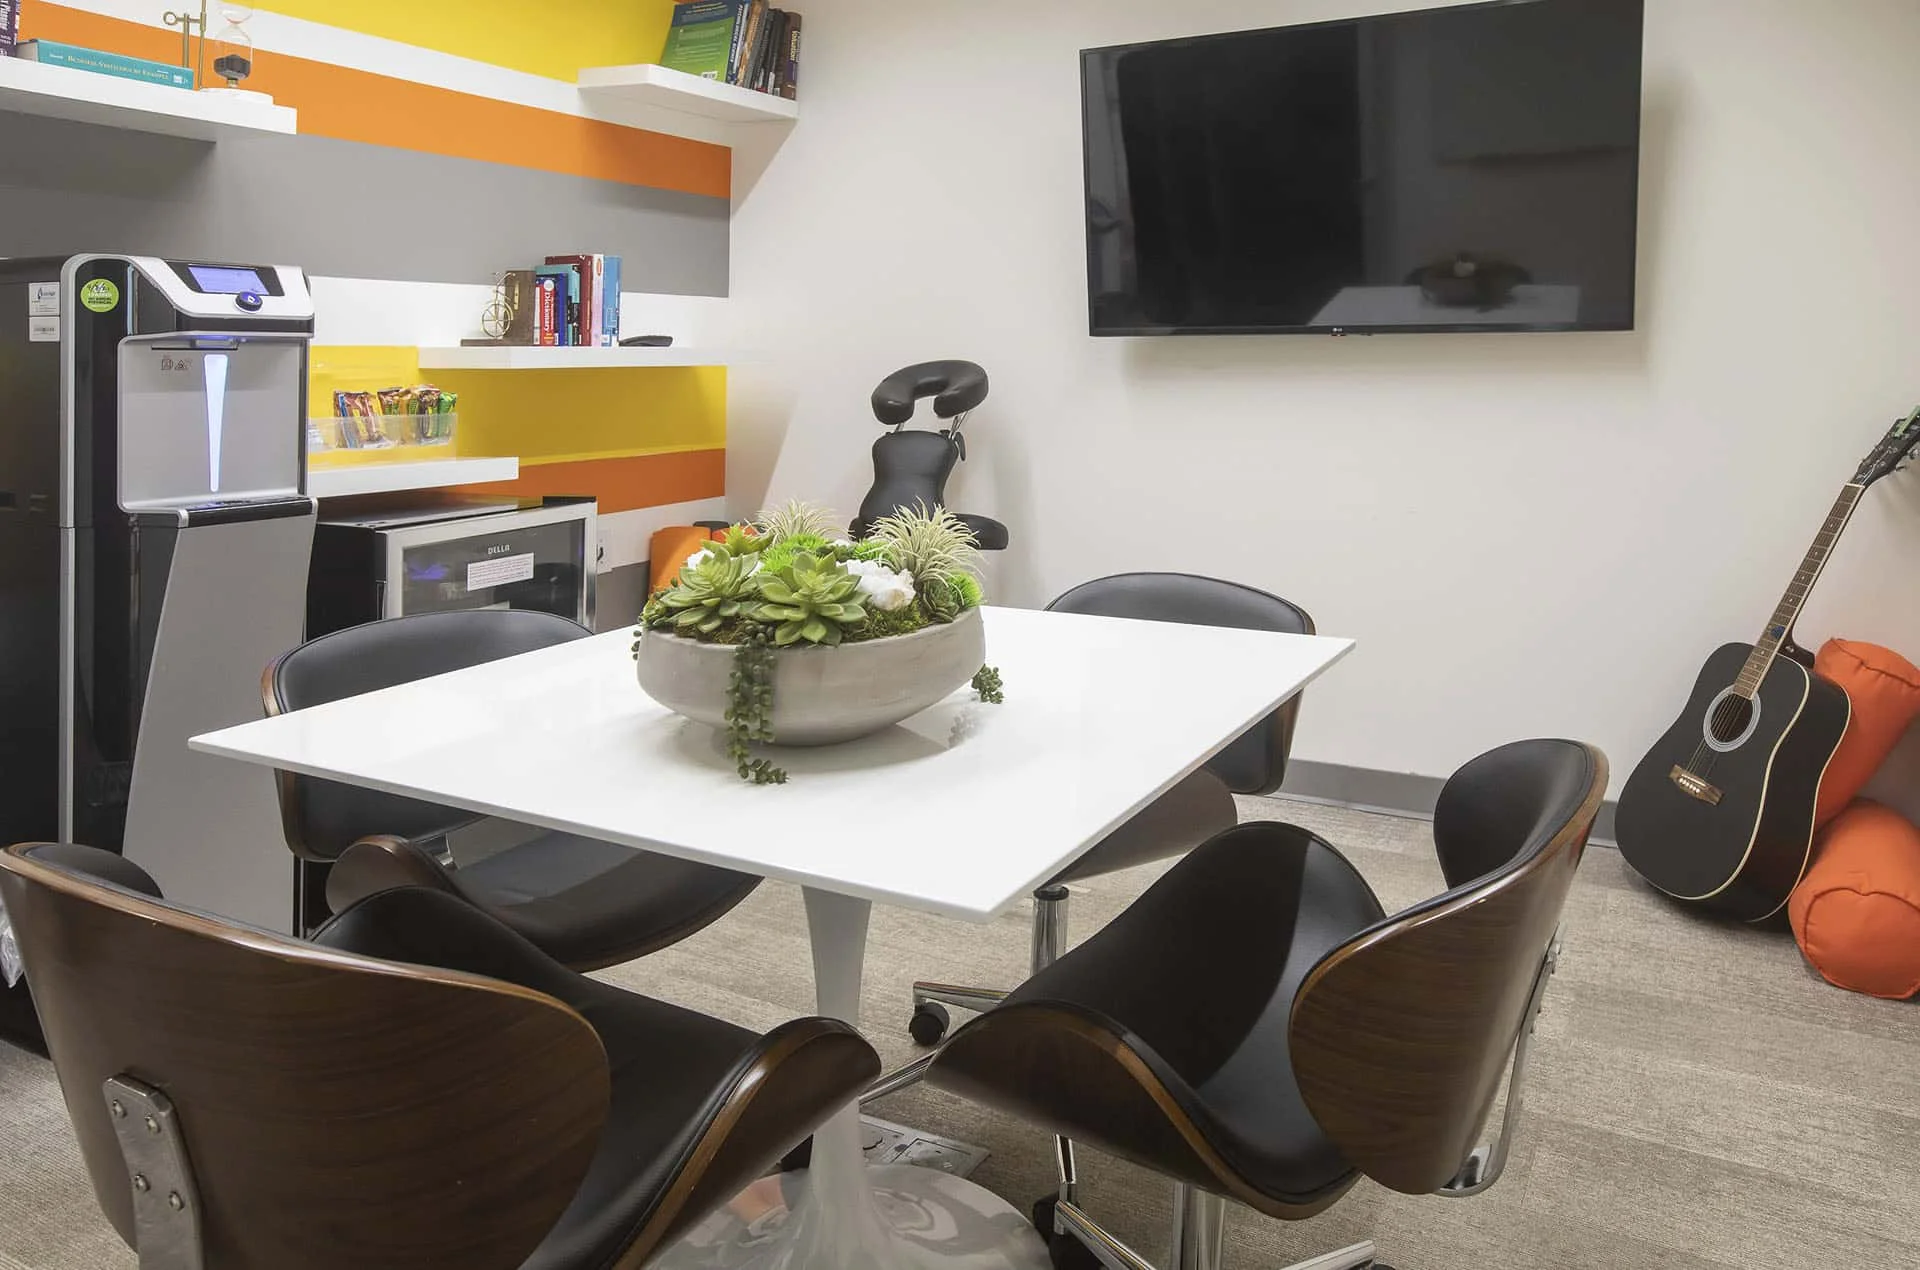 Explore rental conference room for casual catchups and brainstorming with dedicated support team to assist with any technical or catering needs.